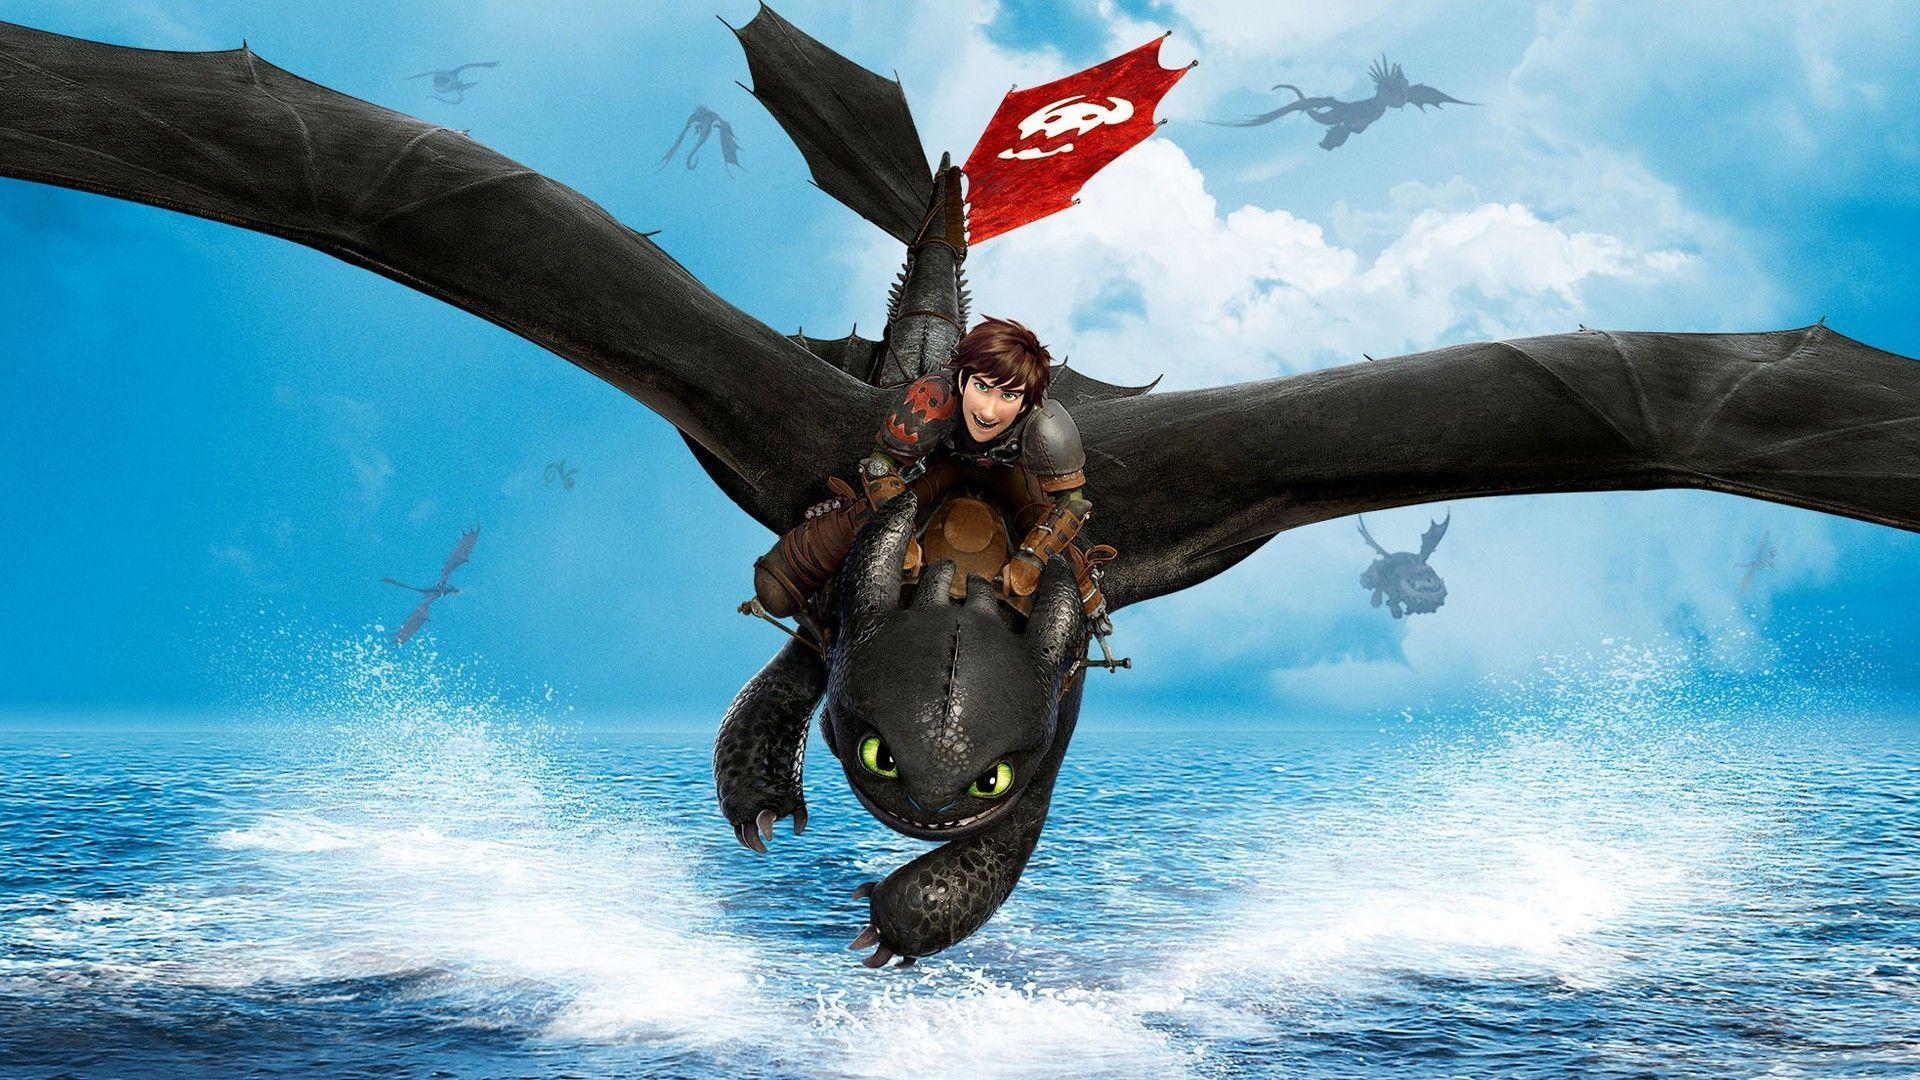 How To Train Your Dragon 2 Hiccup And Toothless Wallpaper Id